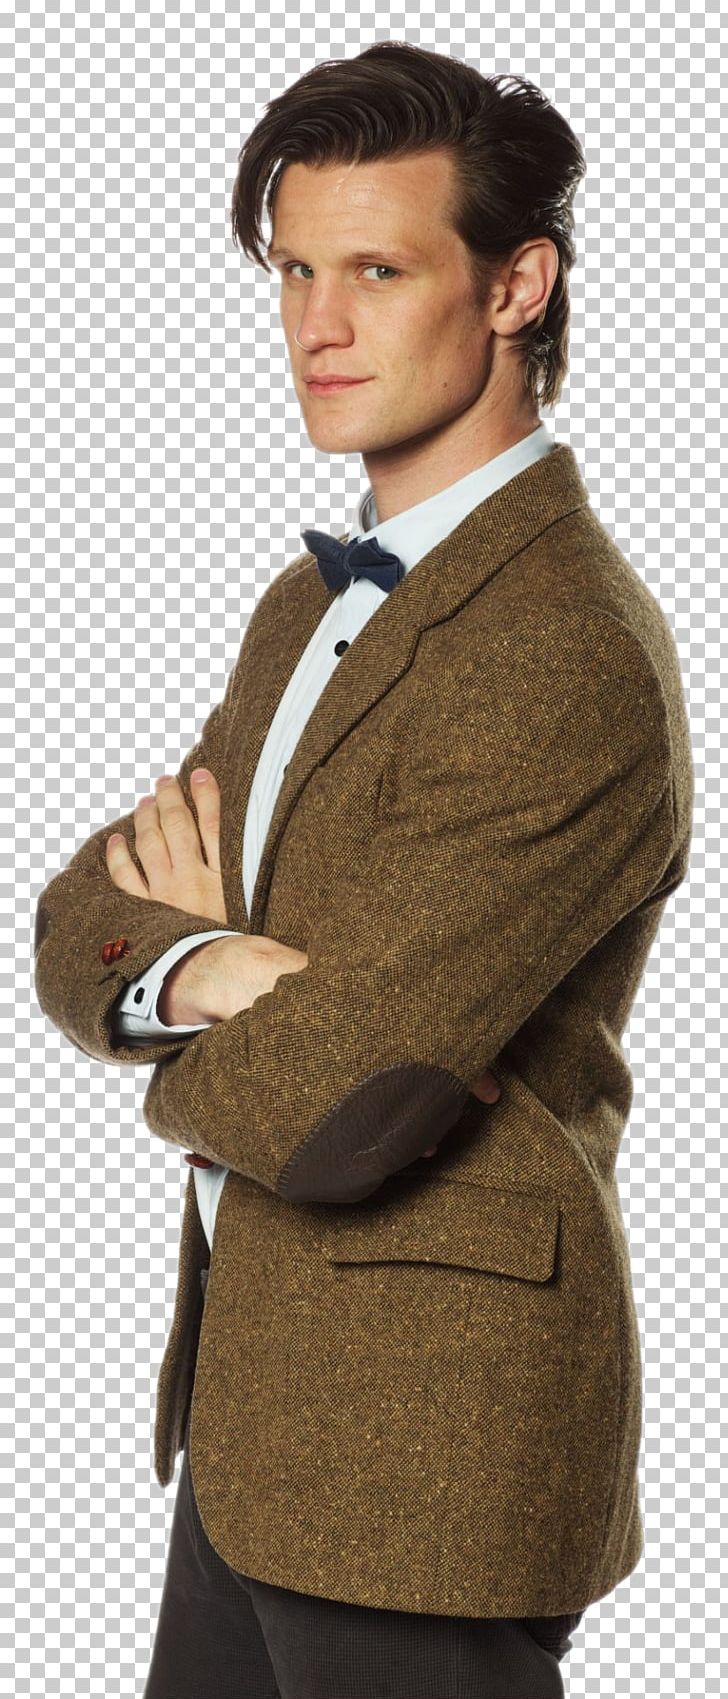 Eleventh Doctor Doctor Who Matt Smith Tenth Doctor PNG, Clipart, Ben 10, Blazer, Clipart, Coat, Companion Free PNG Download